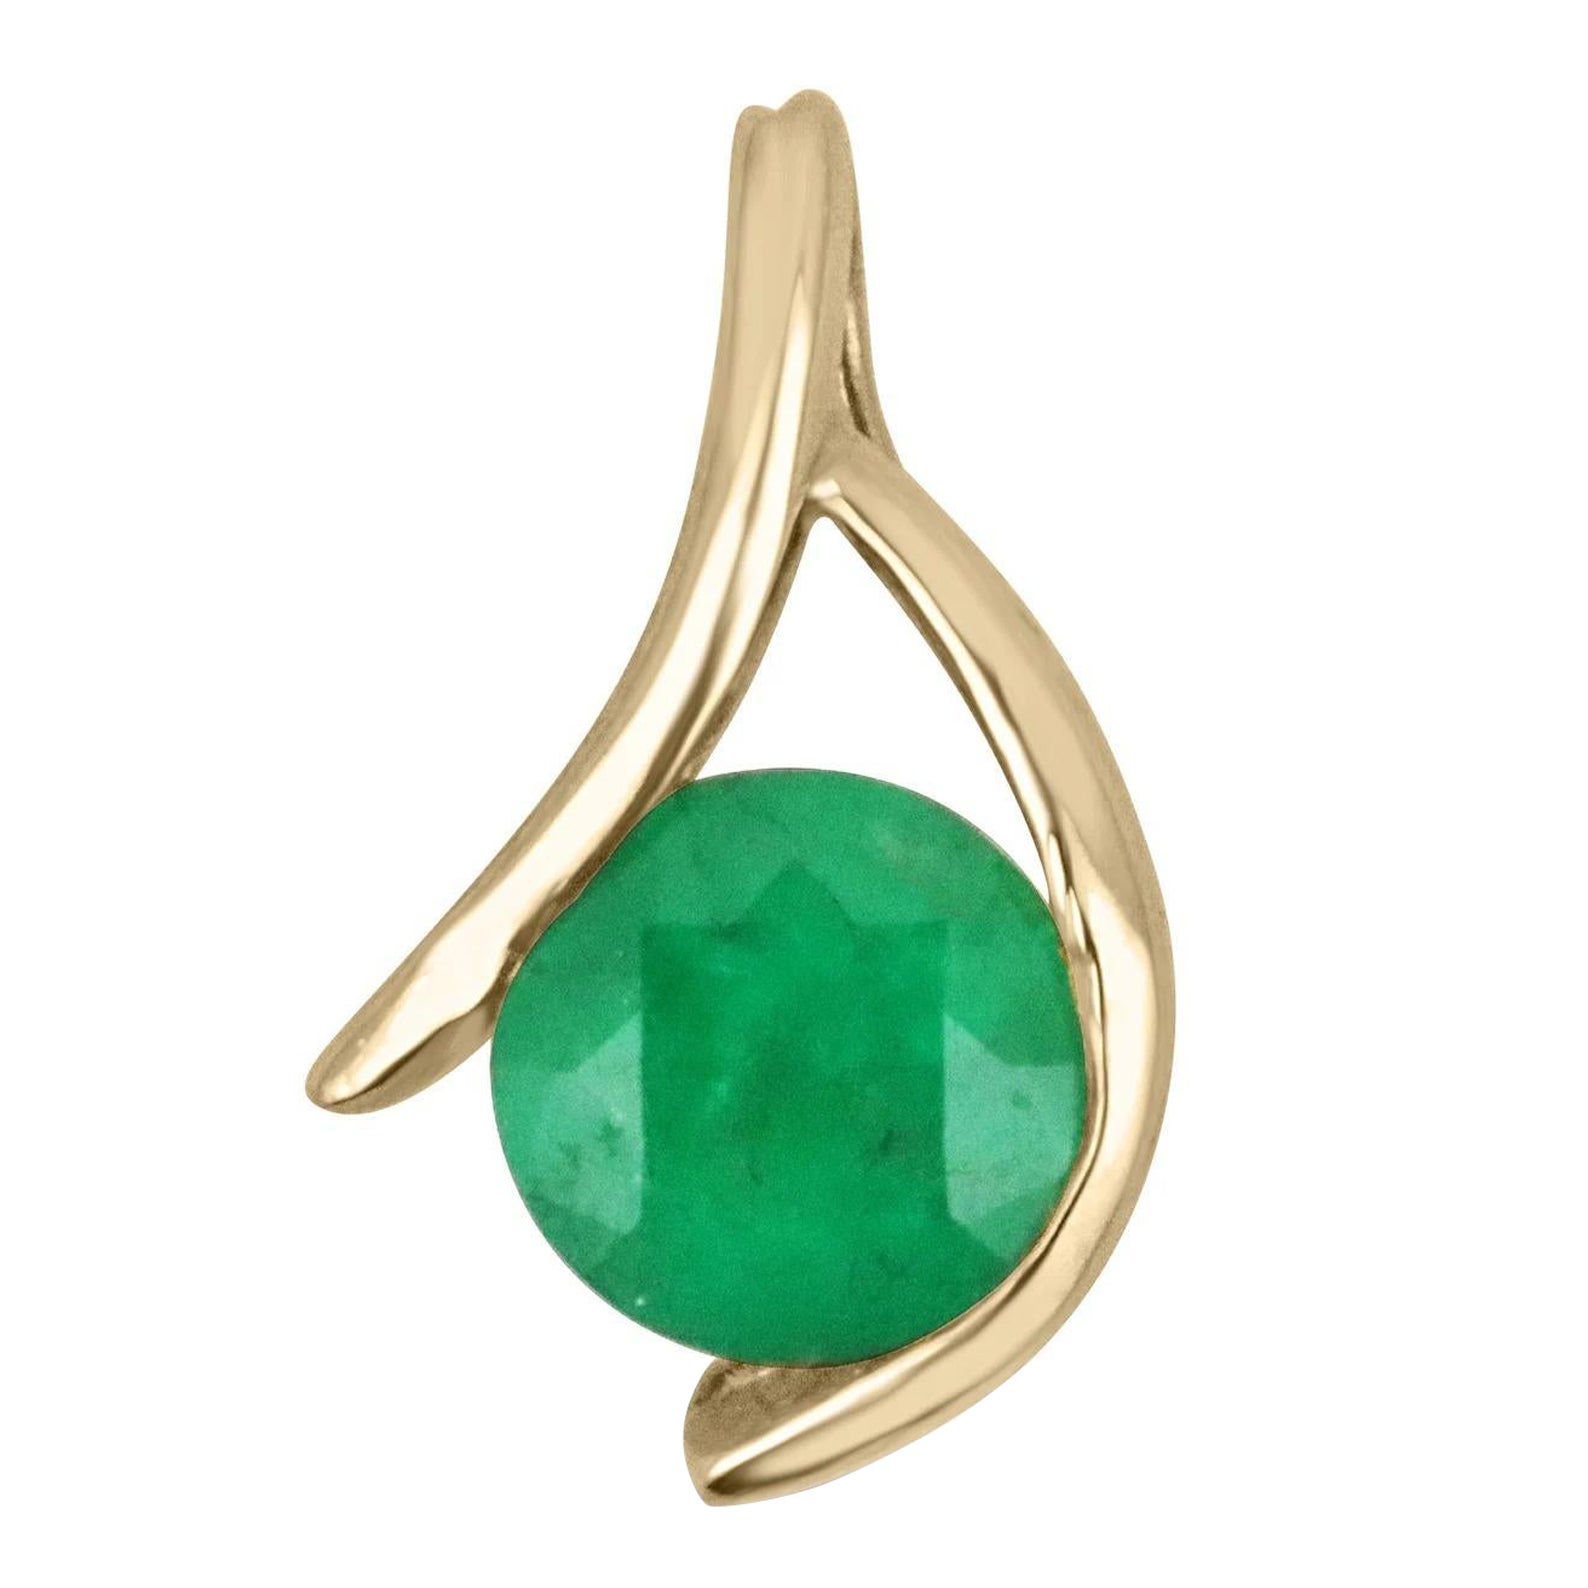 2.0 Carat Colombian Emerald-Round Cut Kanji Shaped Solitaire Pendant Gold 14K